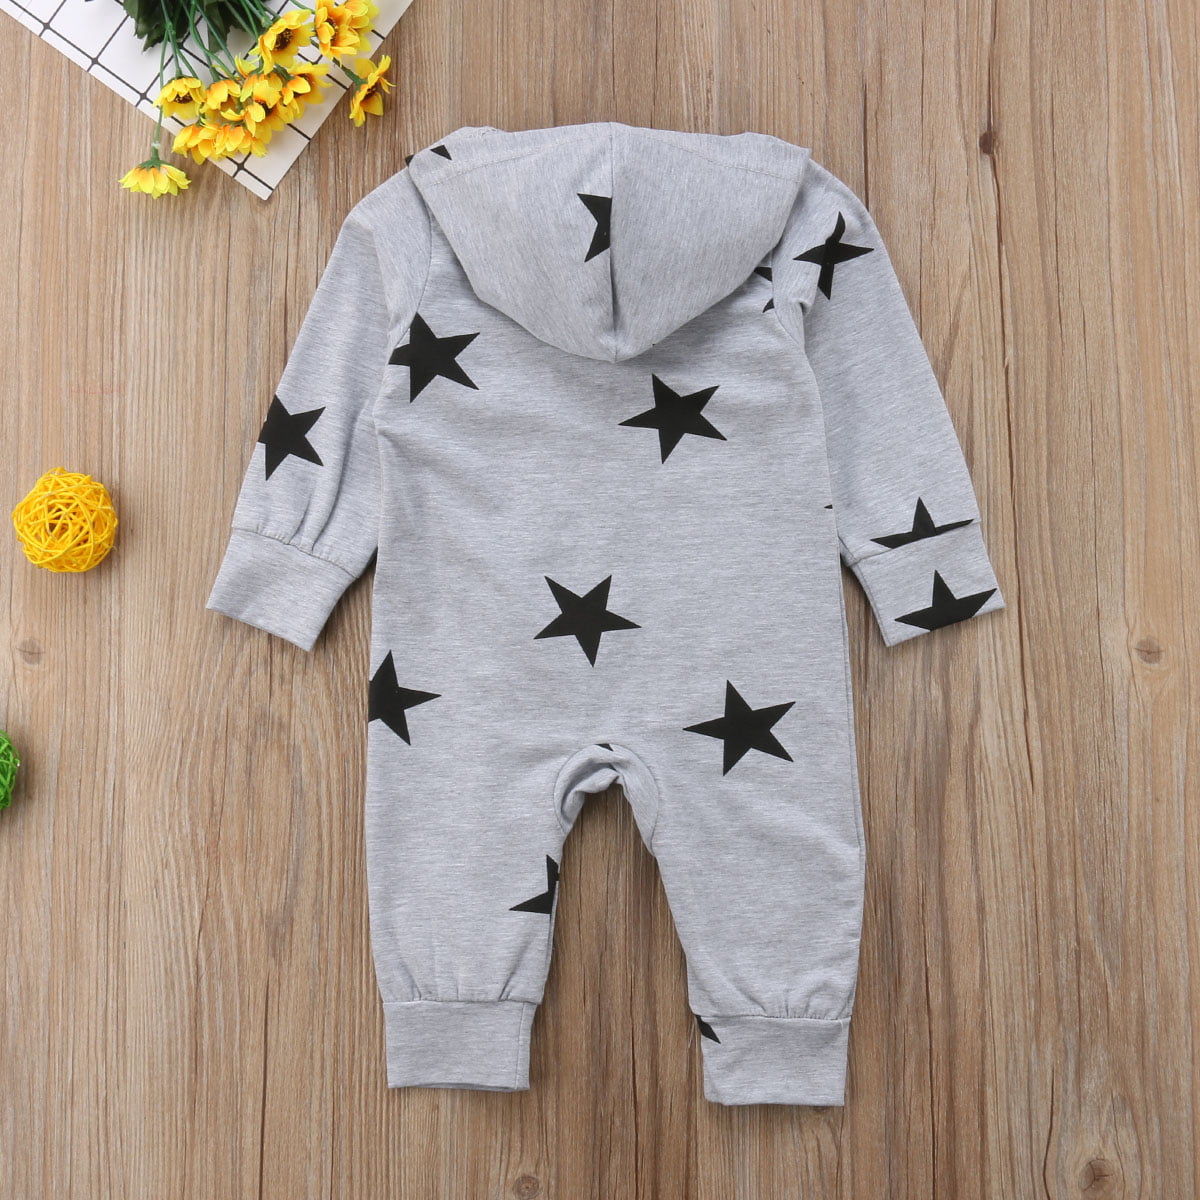 9M, Gray OUBAO Romper Toddler Infant Baby Boy Girl Long Sleeve Deer Romper Outfits Set Jumpsuit Bodysuit Clothes